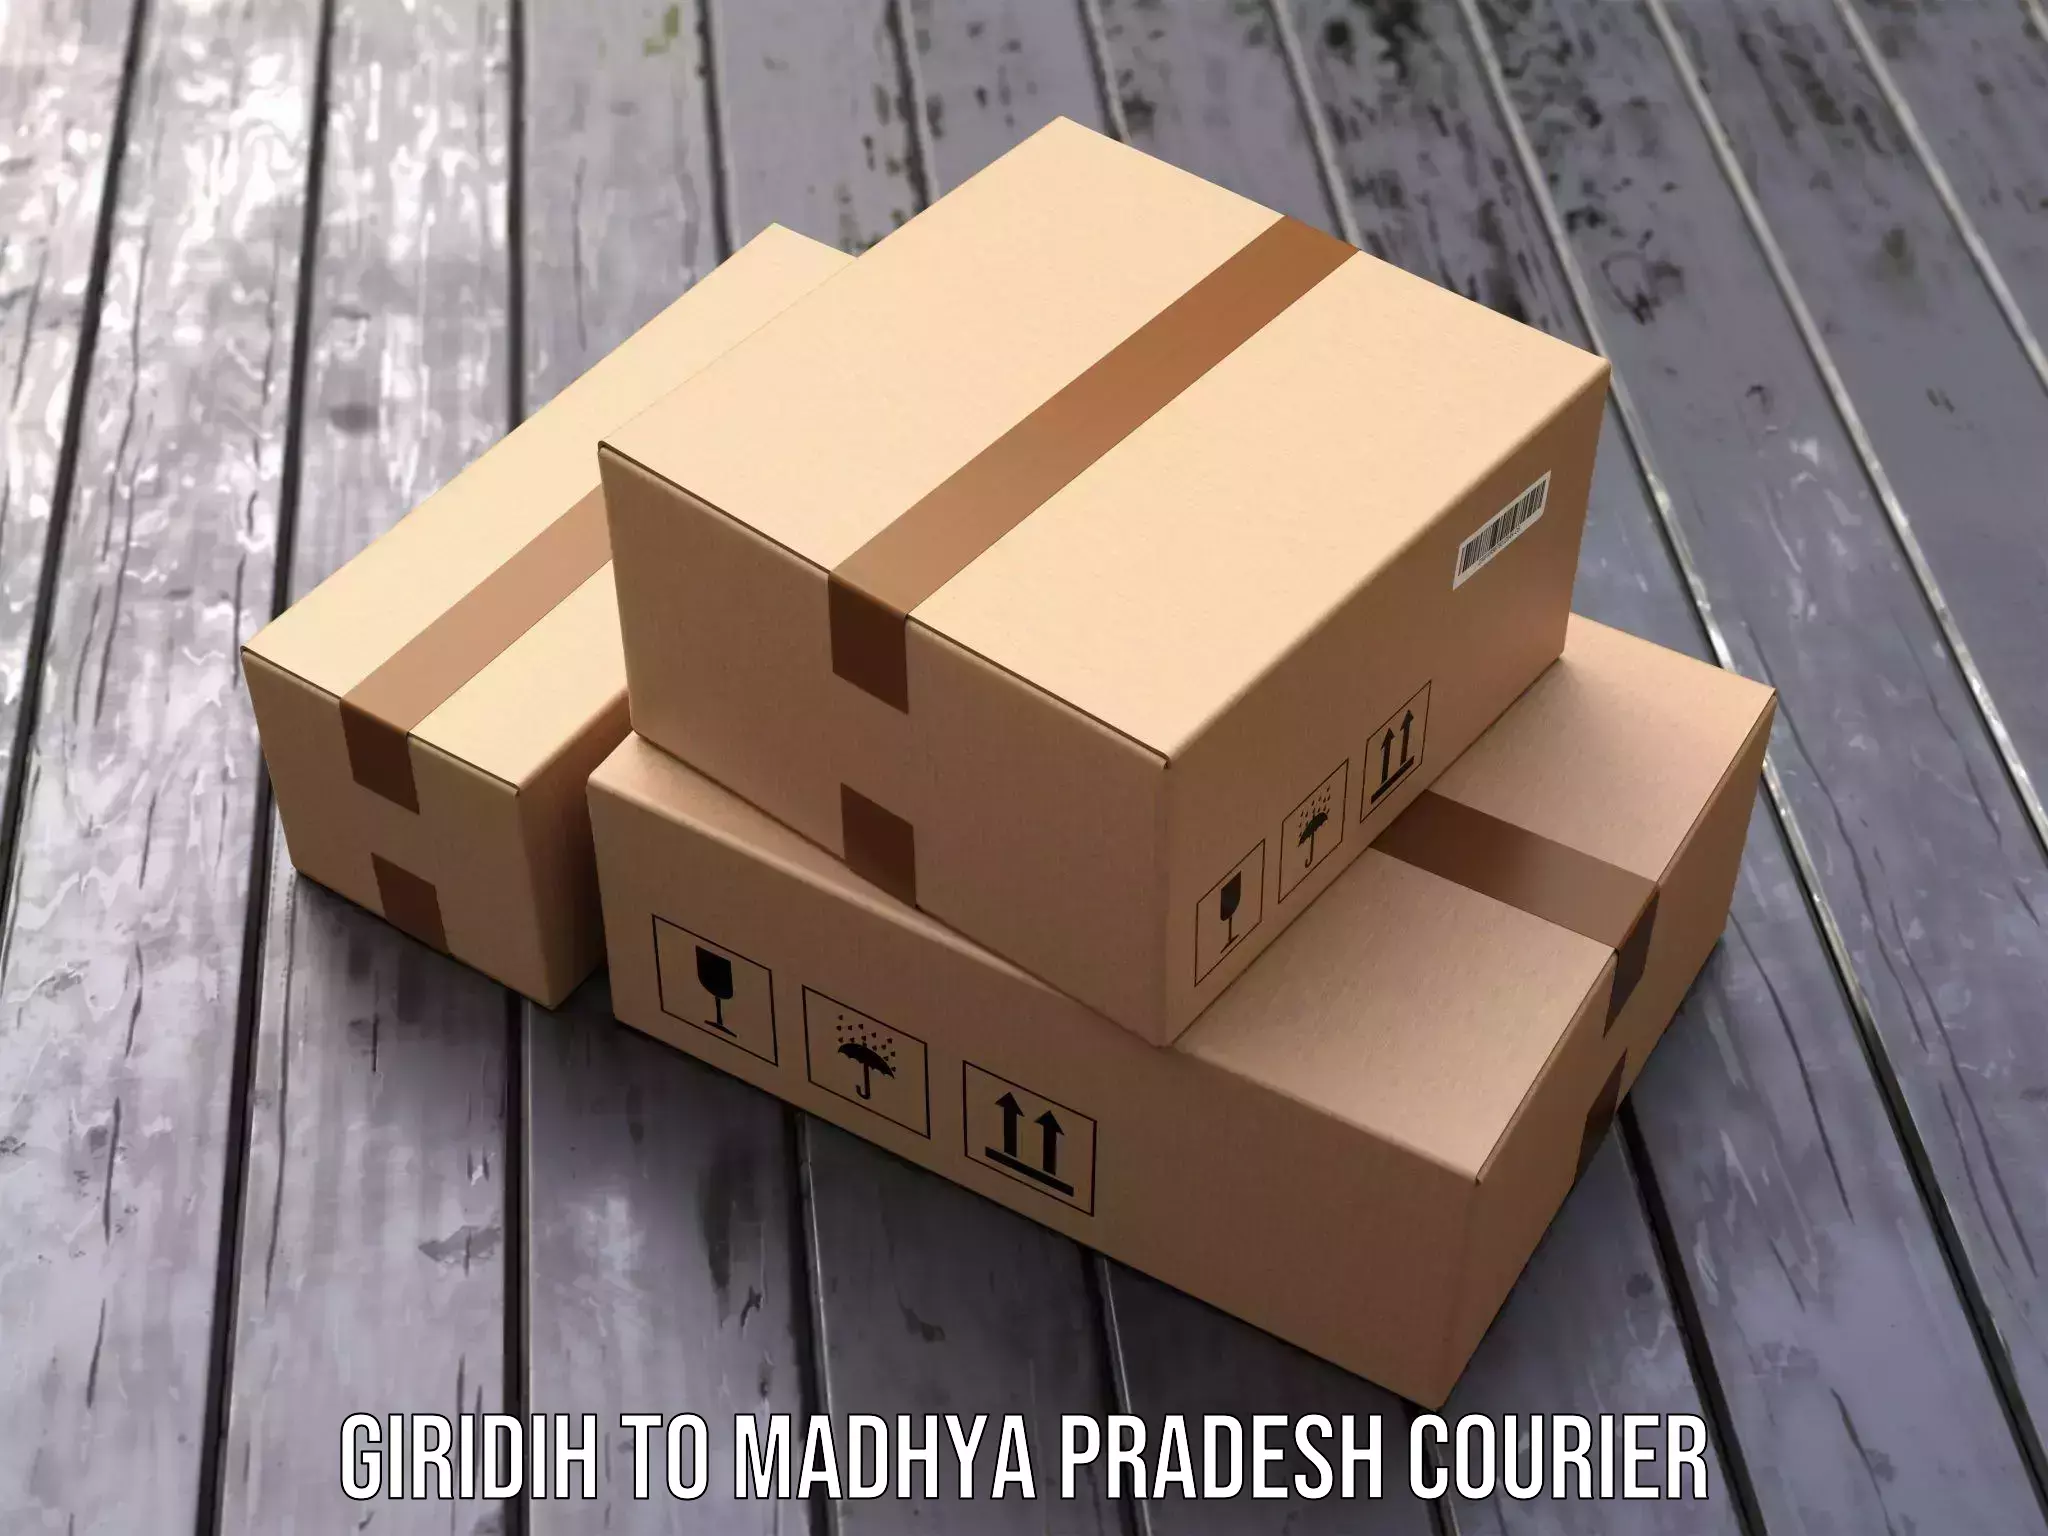 Multi-national courier services Giridih to Ratangarh MP